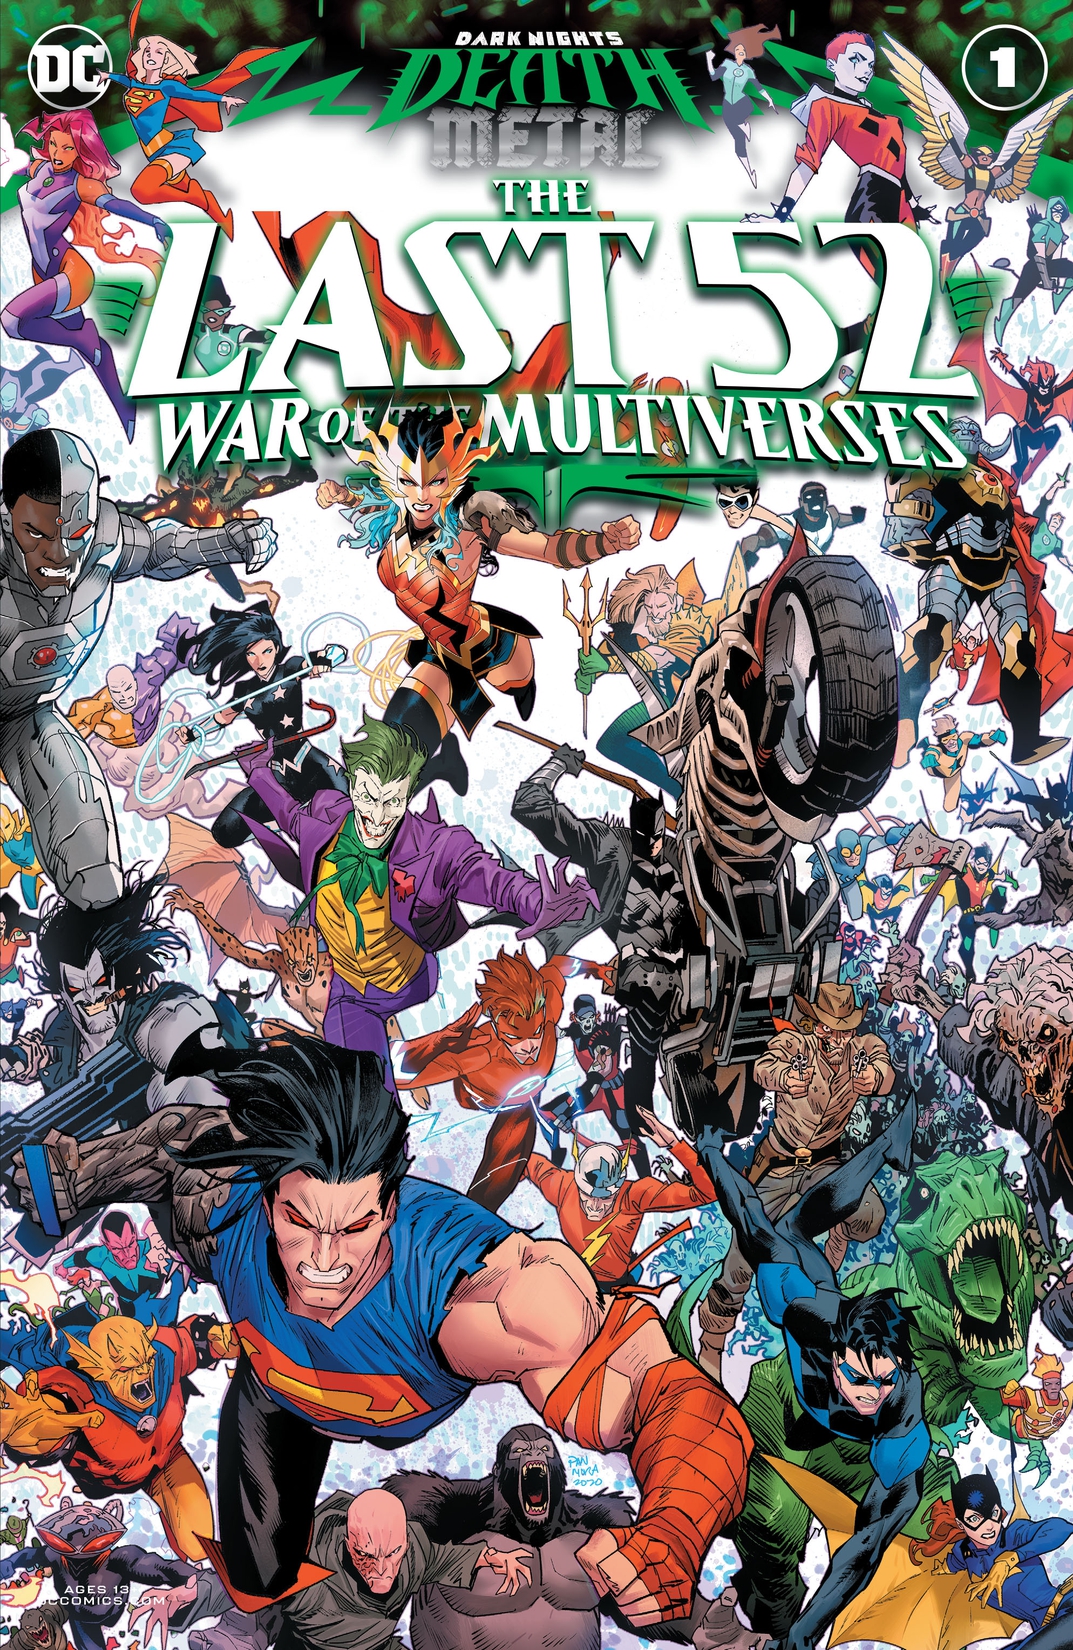 Dark Nights: Death Metal The Last 52: War of the Multiverses #1 preview images